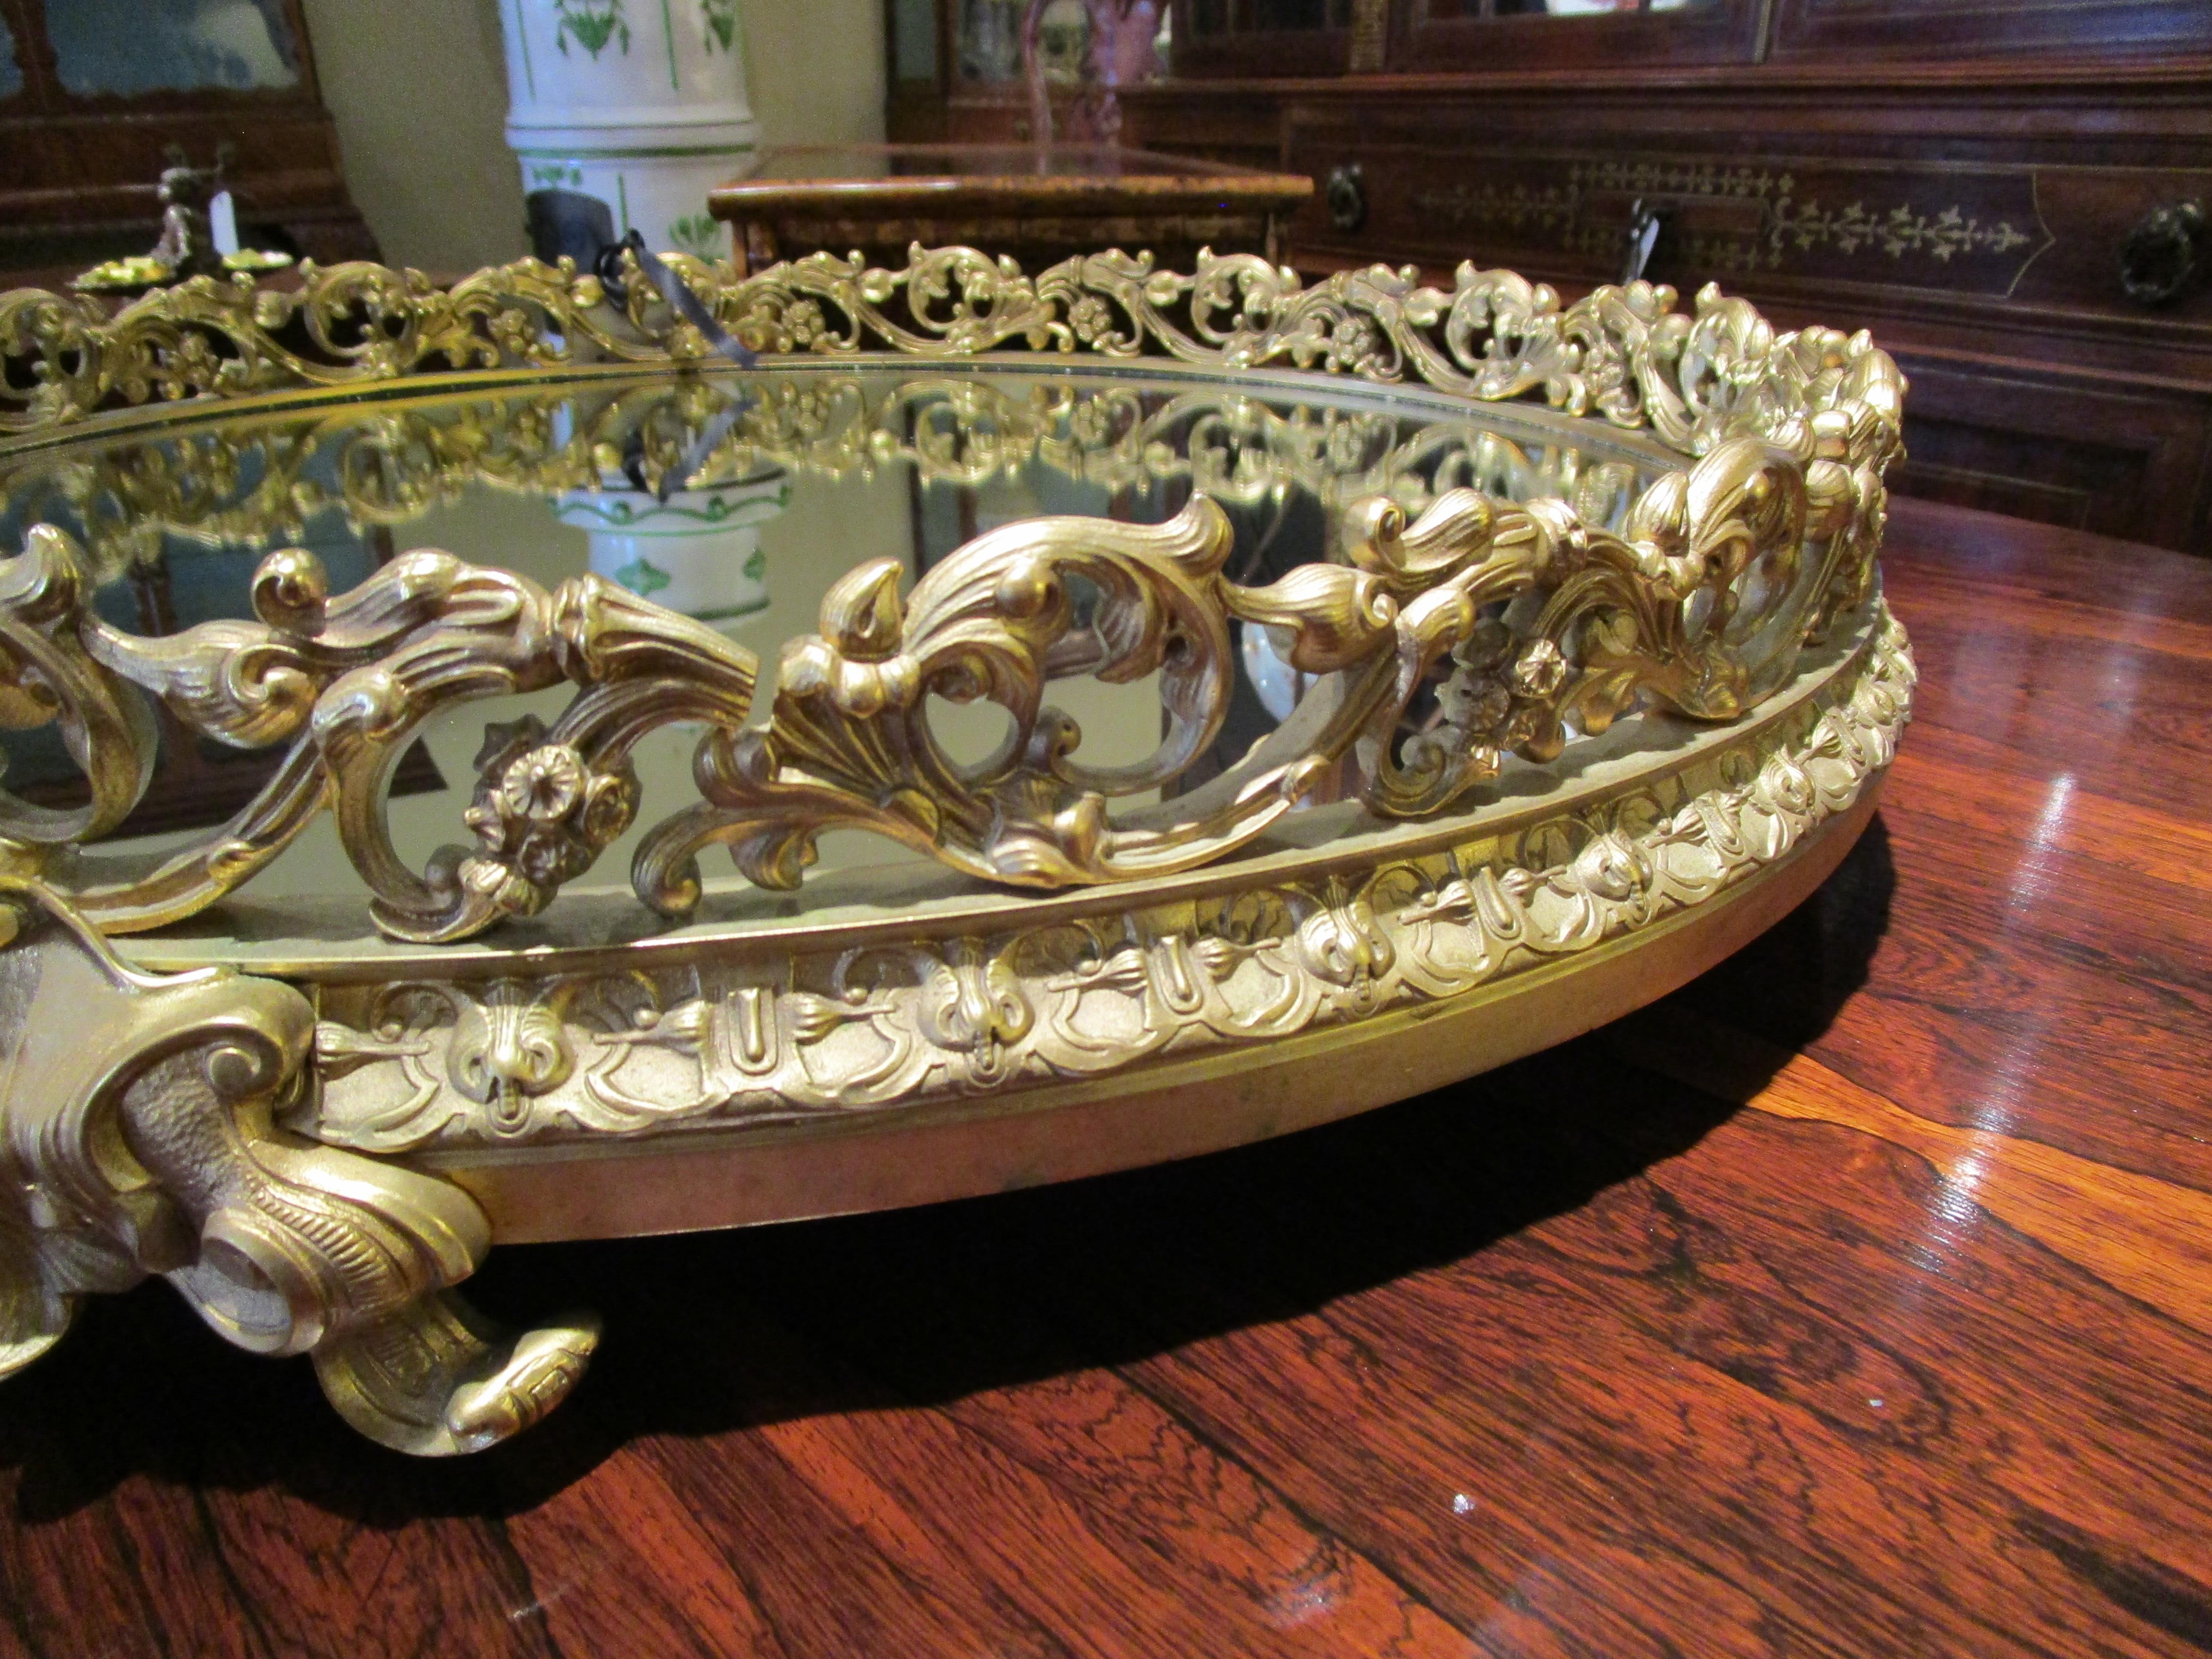 A very fine 19th century French gilt bronze mirrored plateau . Heavy gilt bronze detail . Finest chasing with the original gilt bronze .